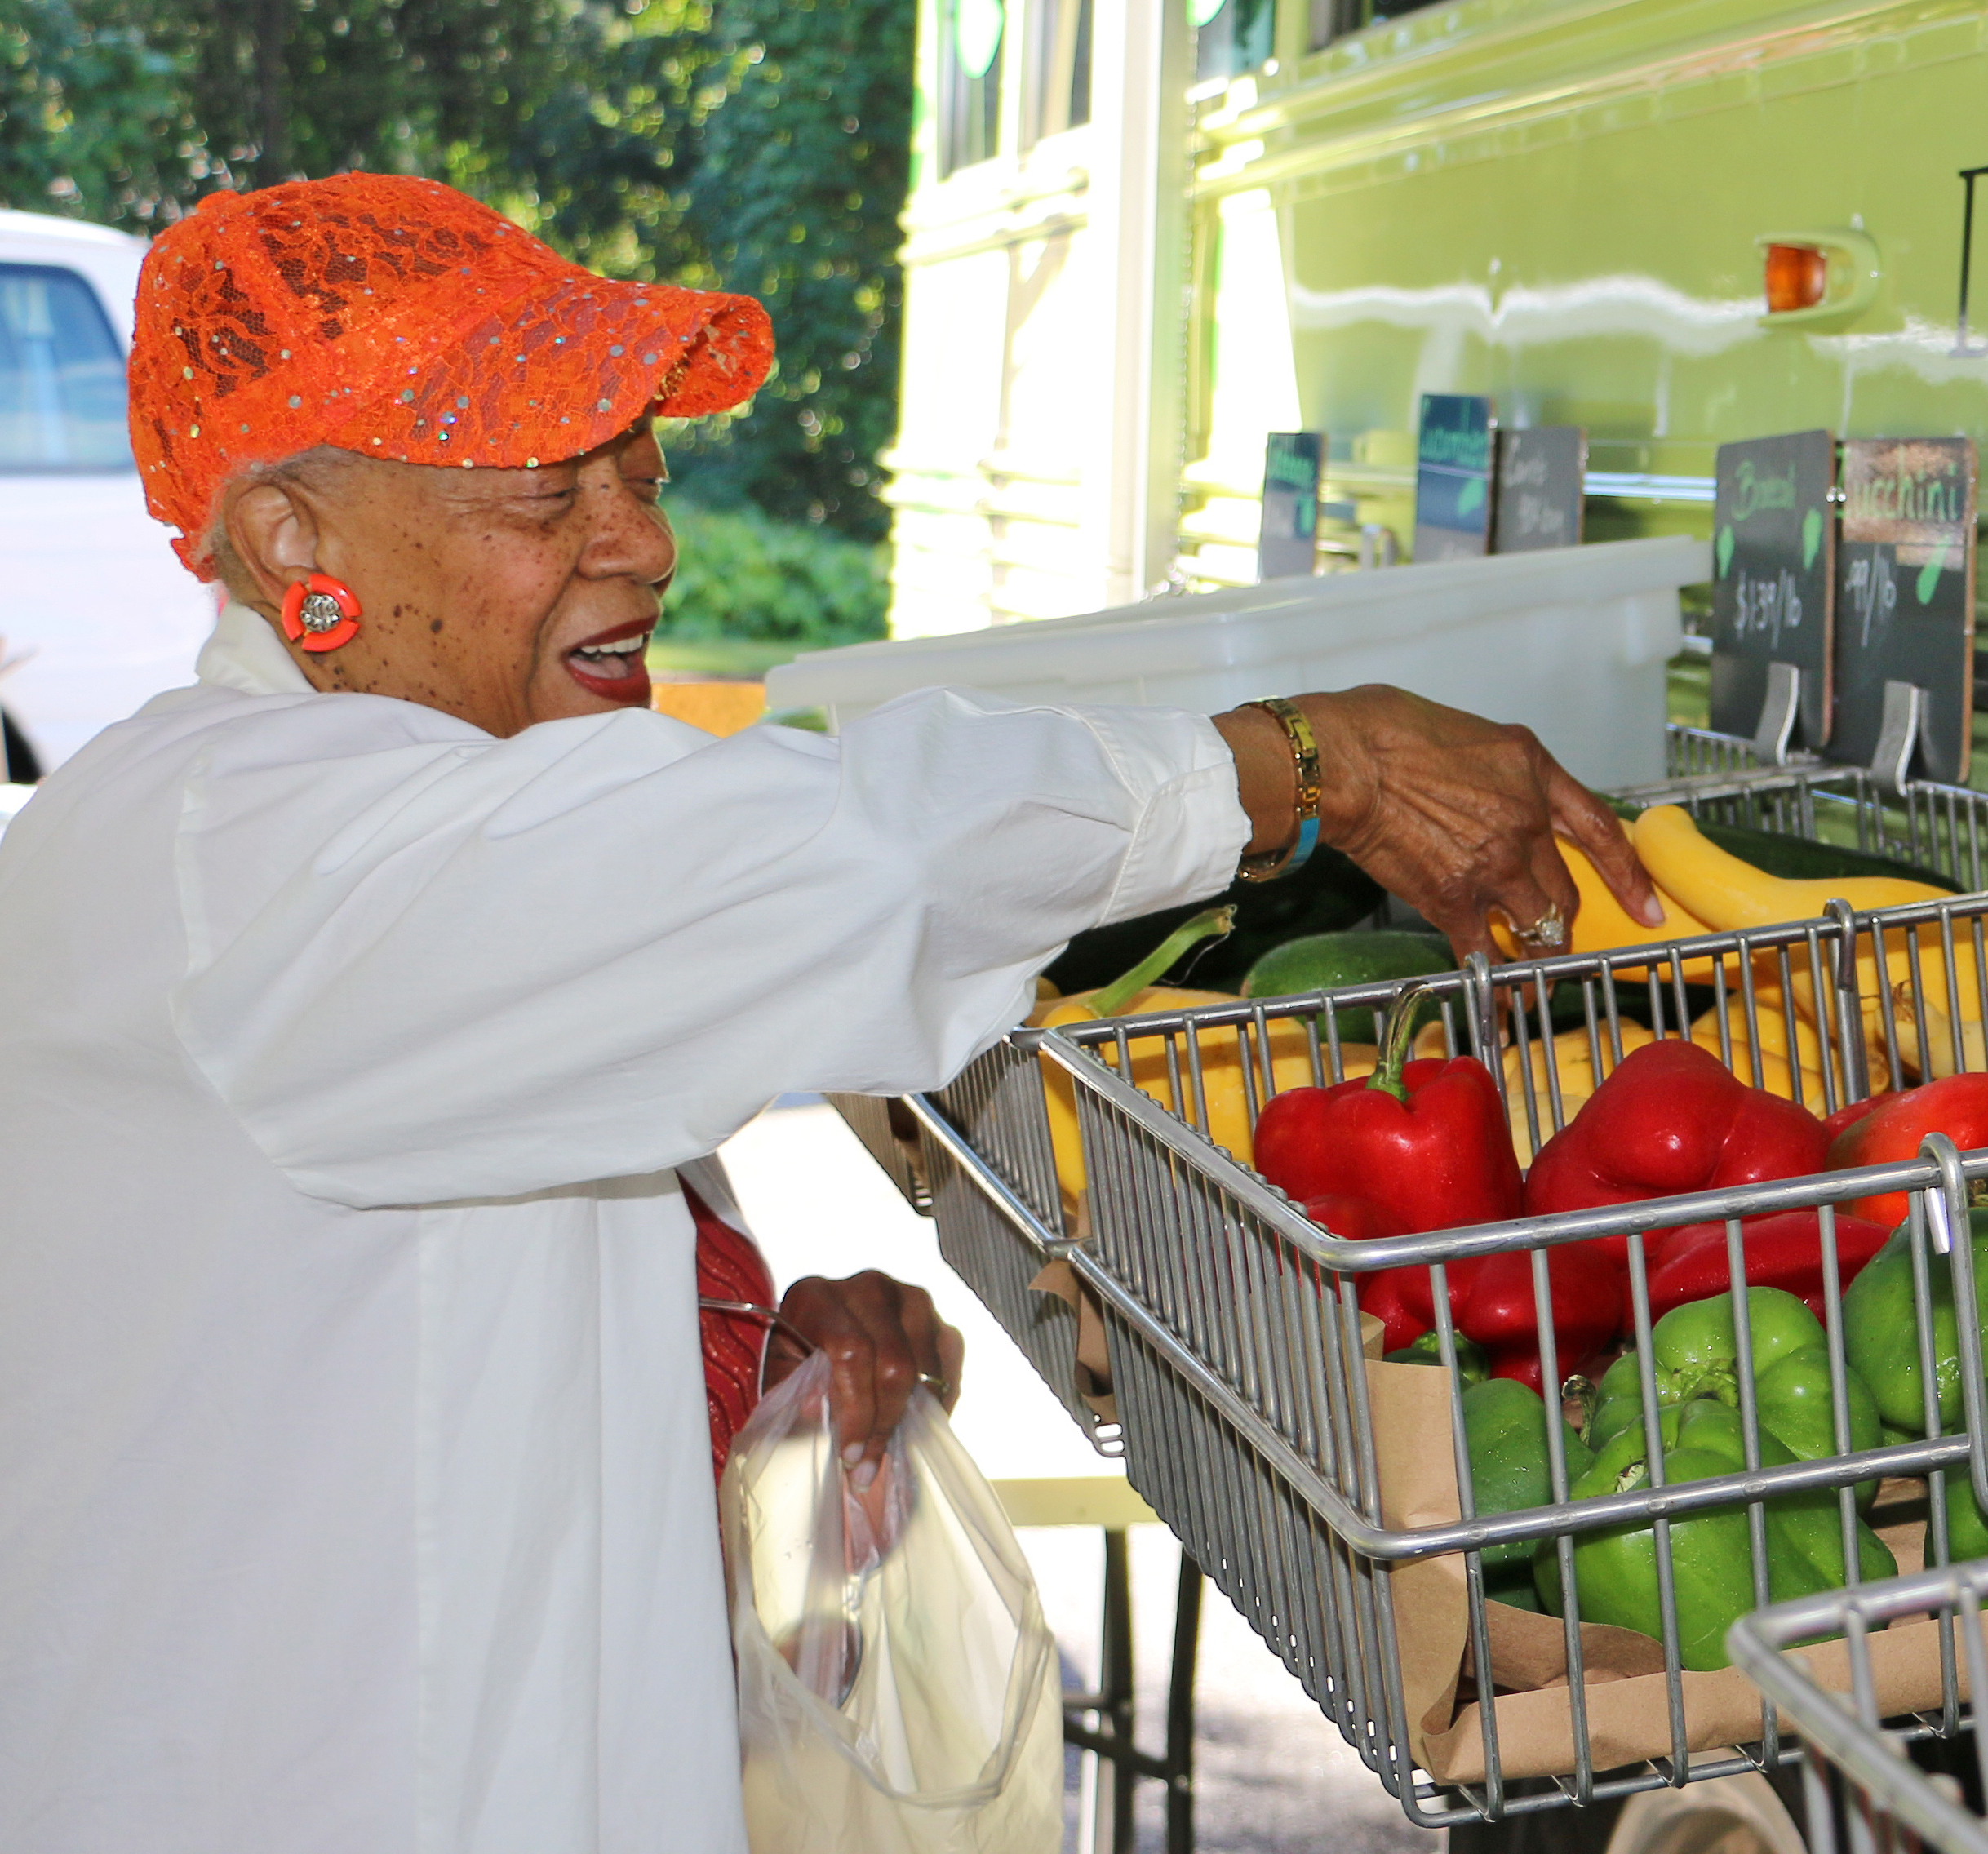 Connie Robinson browses the produce at the DeKalb County Mobile Market. The market, operated by UGA Extension in DeKalb County and the DeKalb County Board of Health, brings fresh produce to communities with limited access to fruits and vegetables.